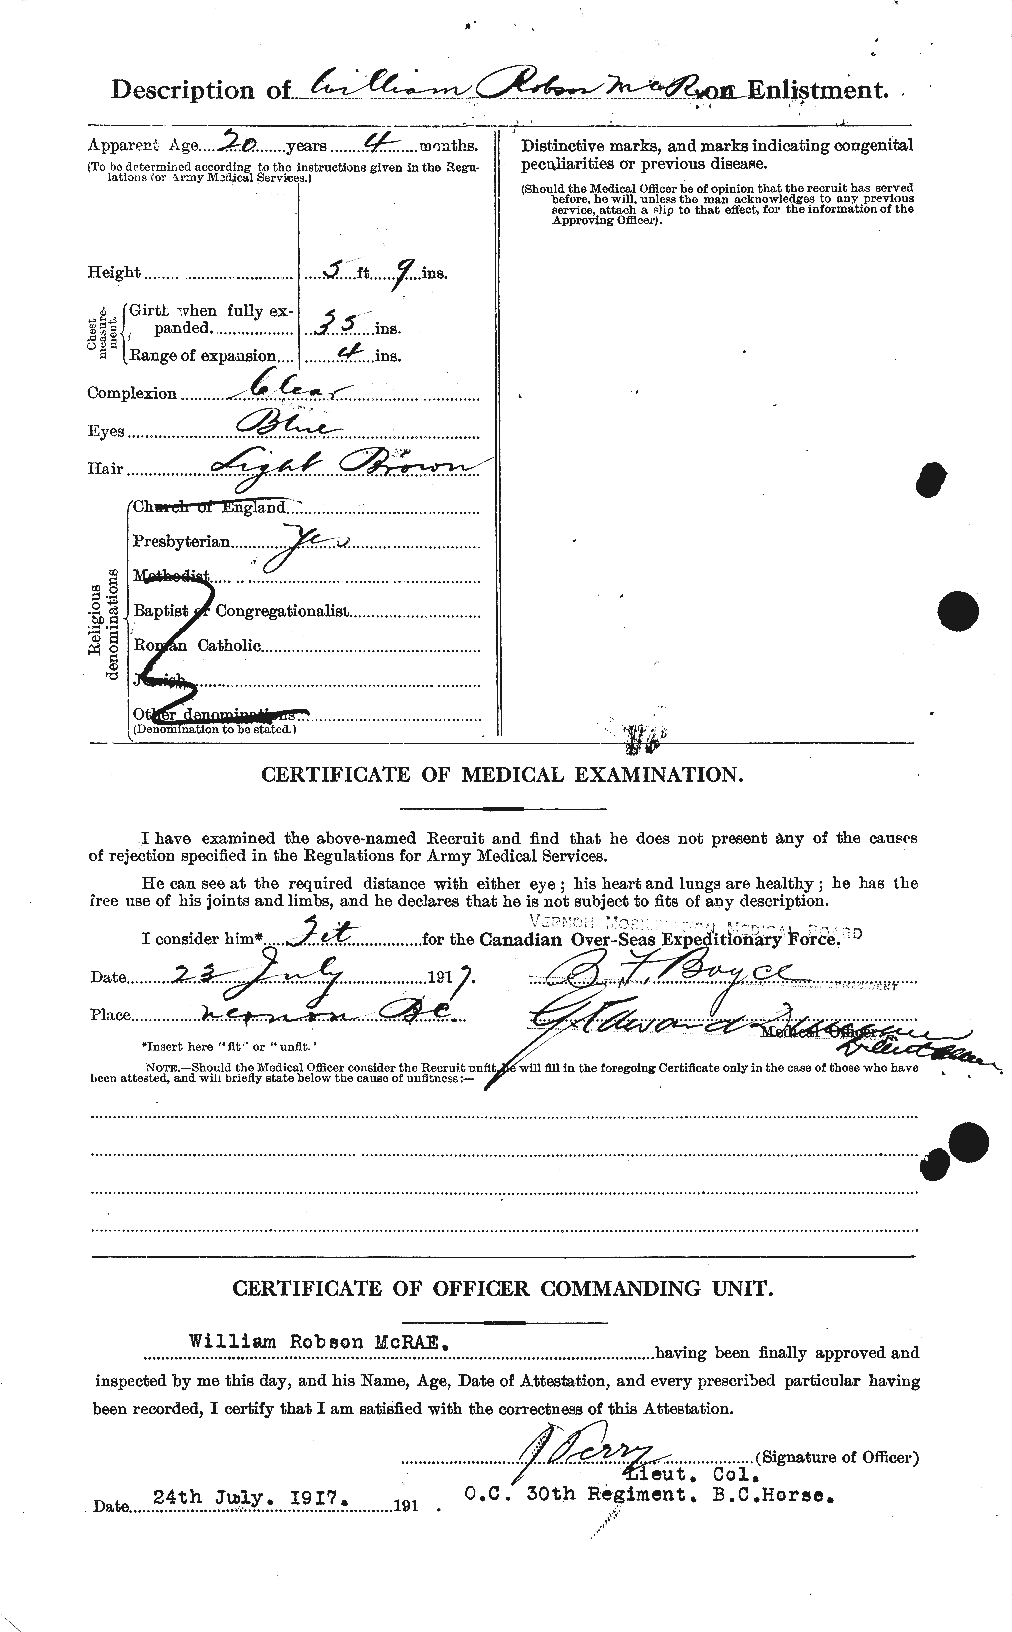 Personnel Records of the First World War - CEF 542999b